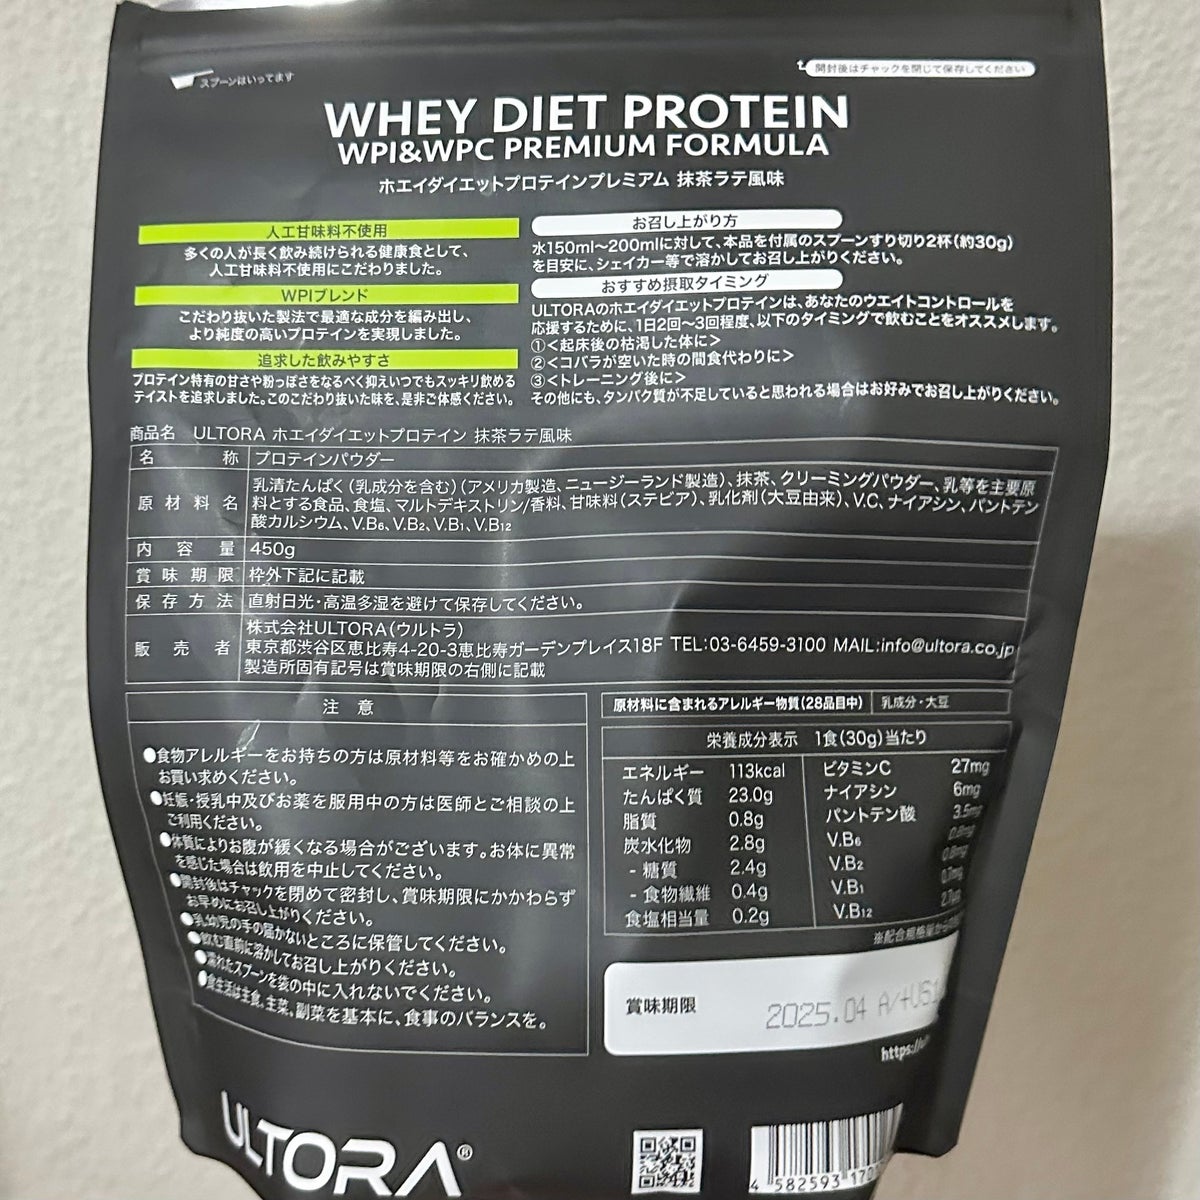 ULTRA WHEY DIET PROTEIN｜ULTRAの口コミ - 飲みやすいプロテイン